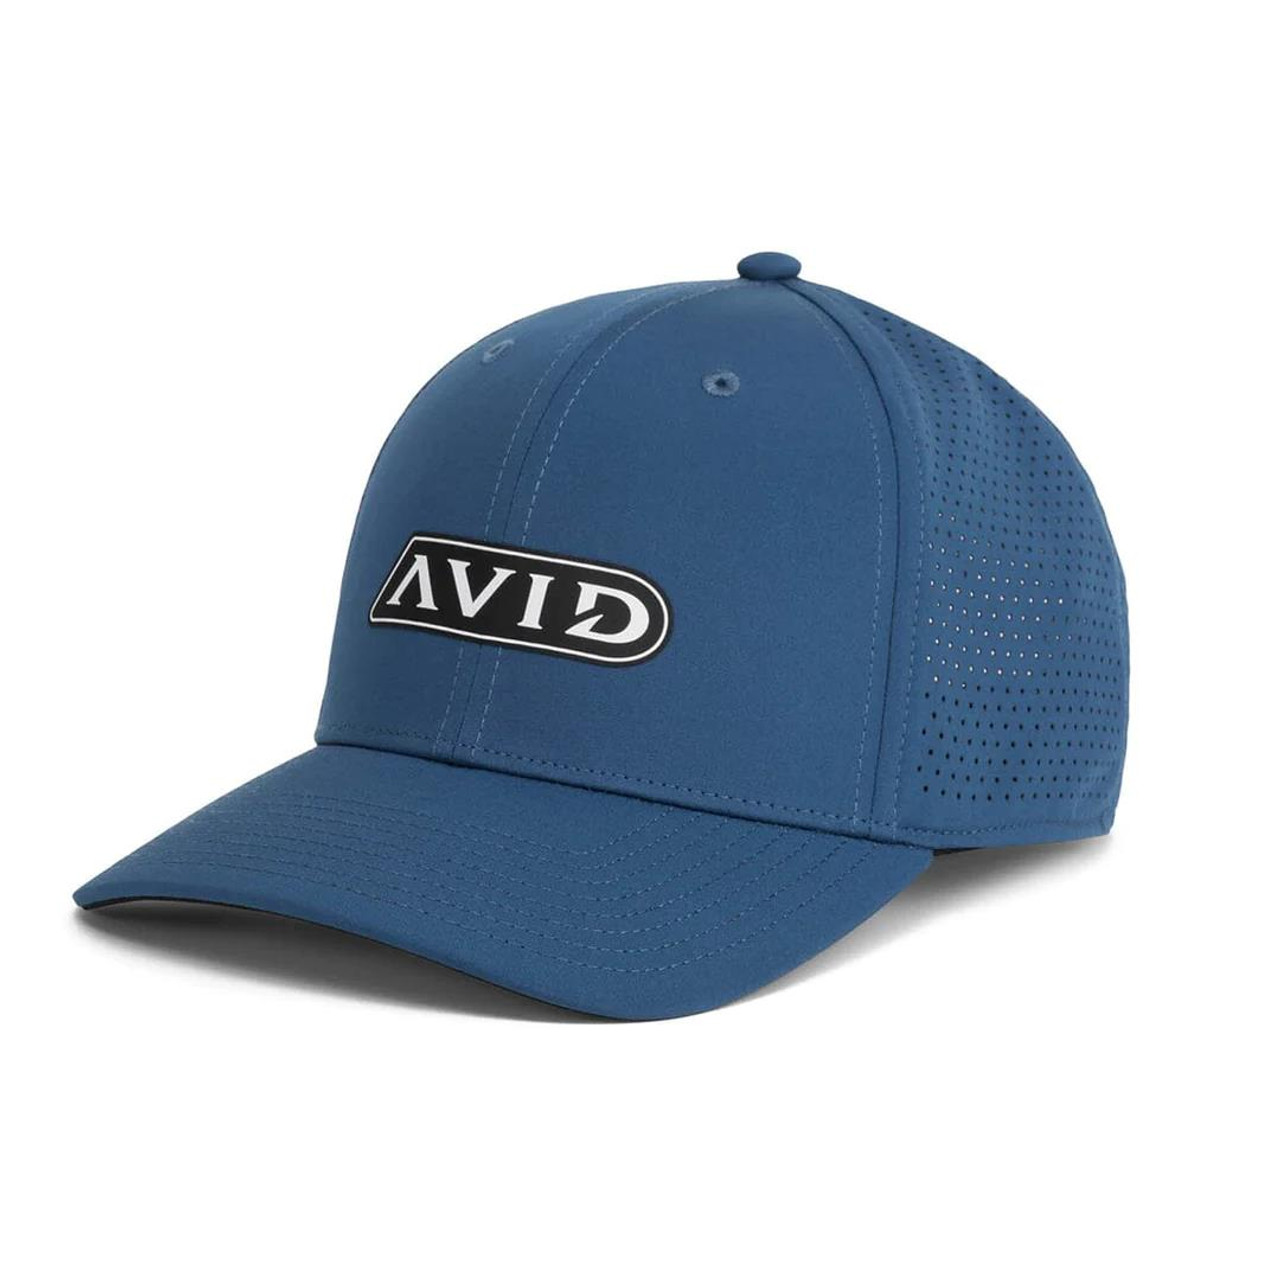 Avid Apex Performance Hat - Heather Abyss - Dance's Sporting Goods